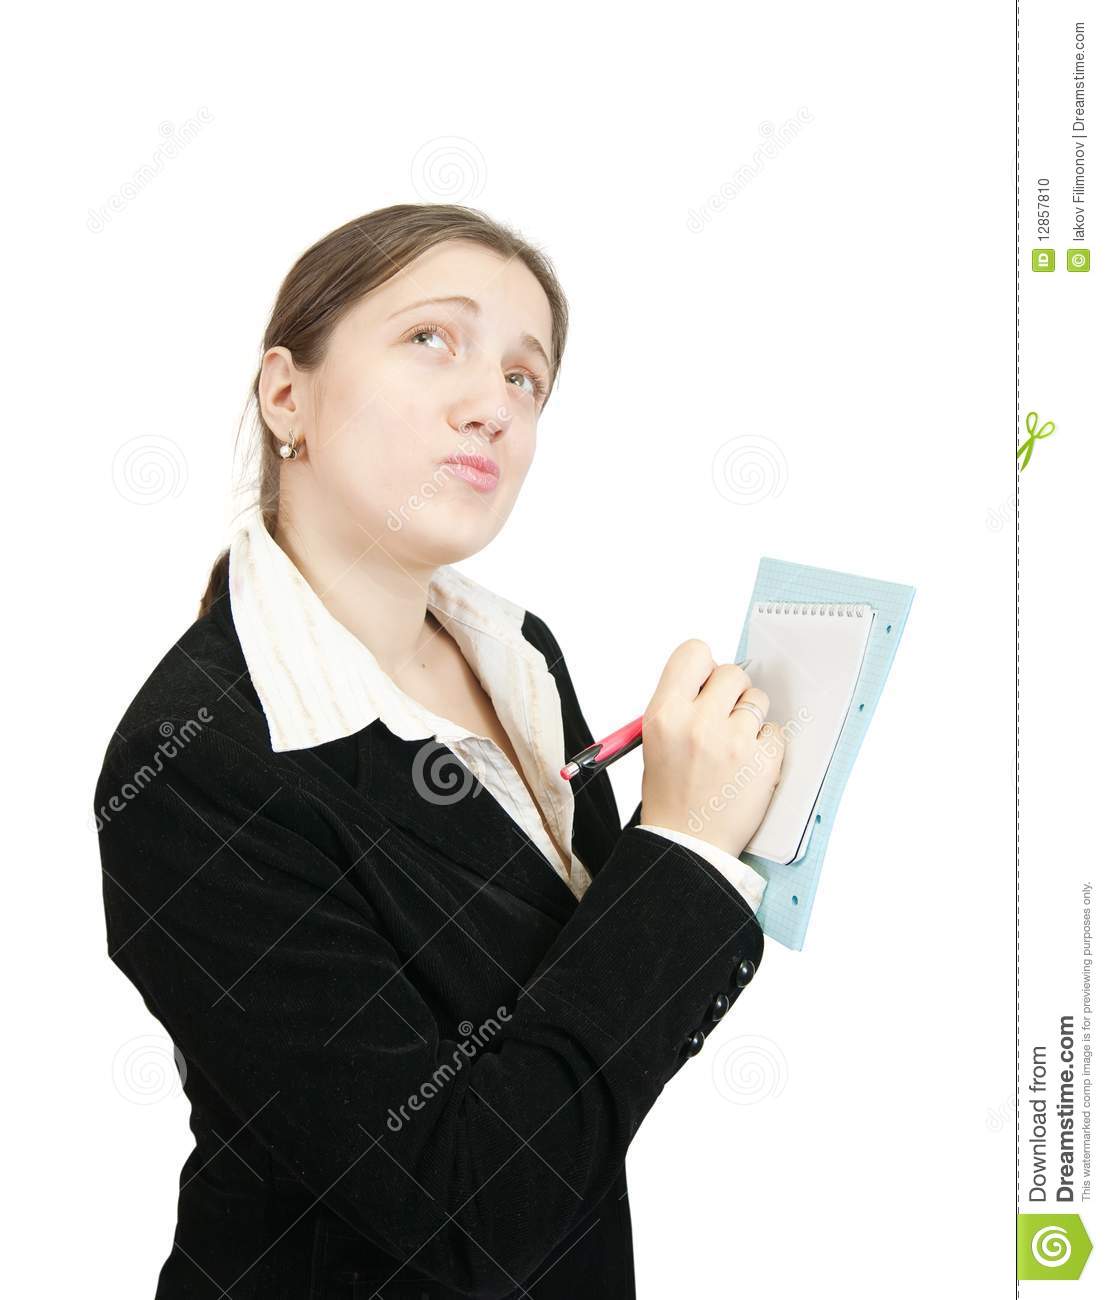 Female Manager Writing Something On A Notebook Isolated Against A